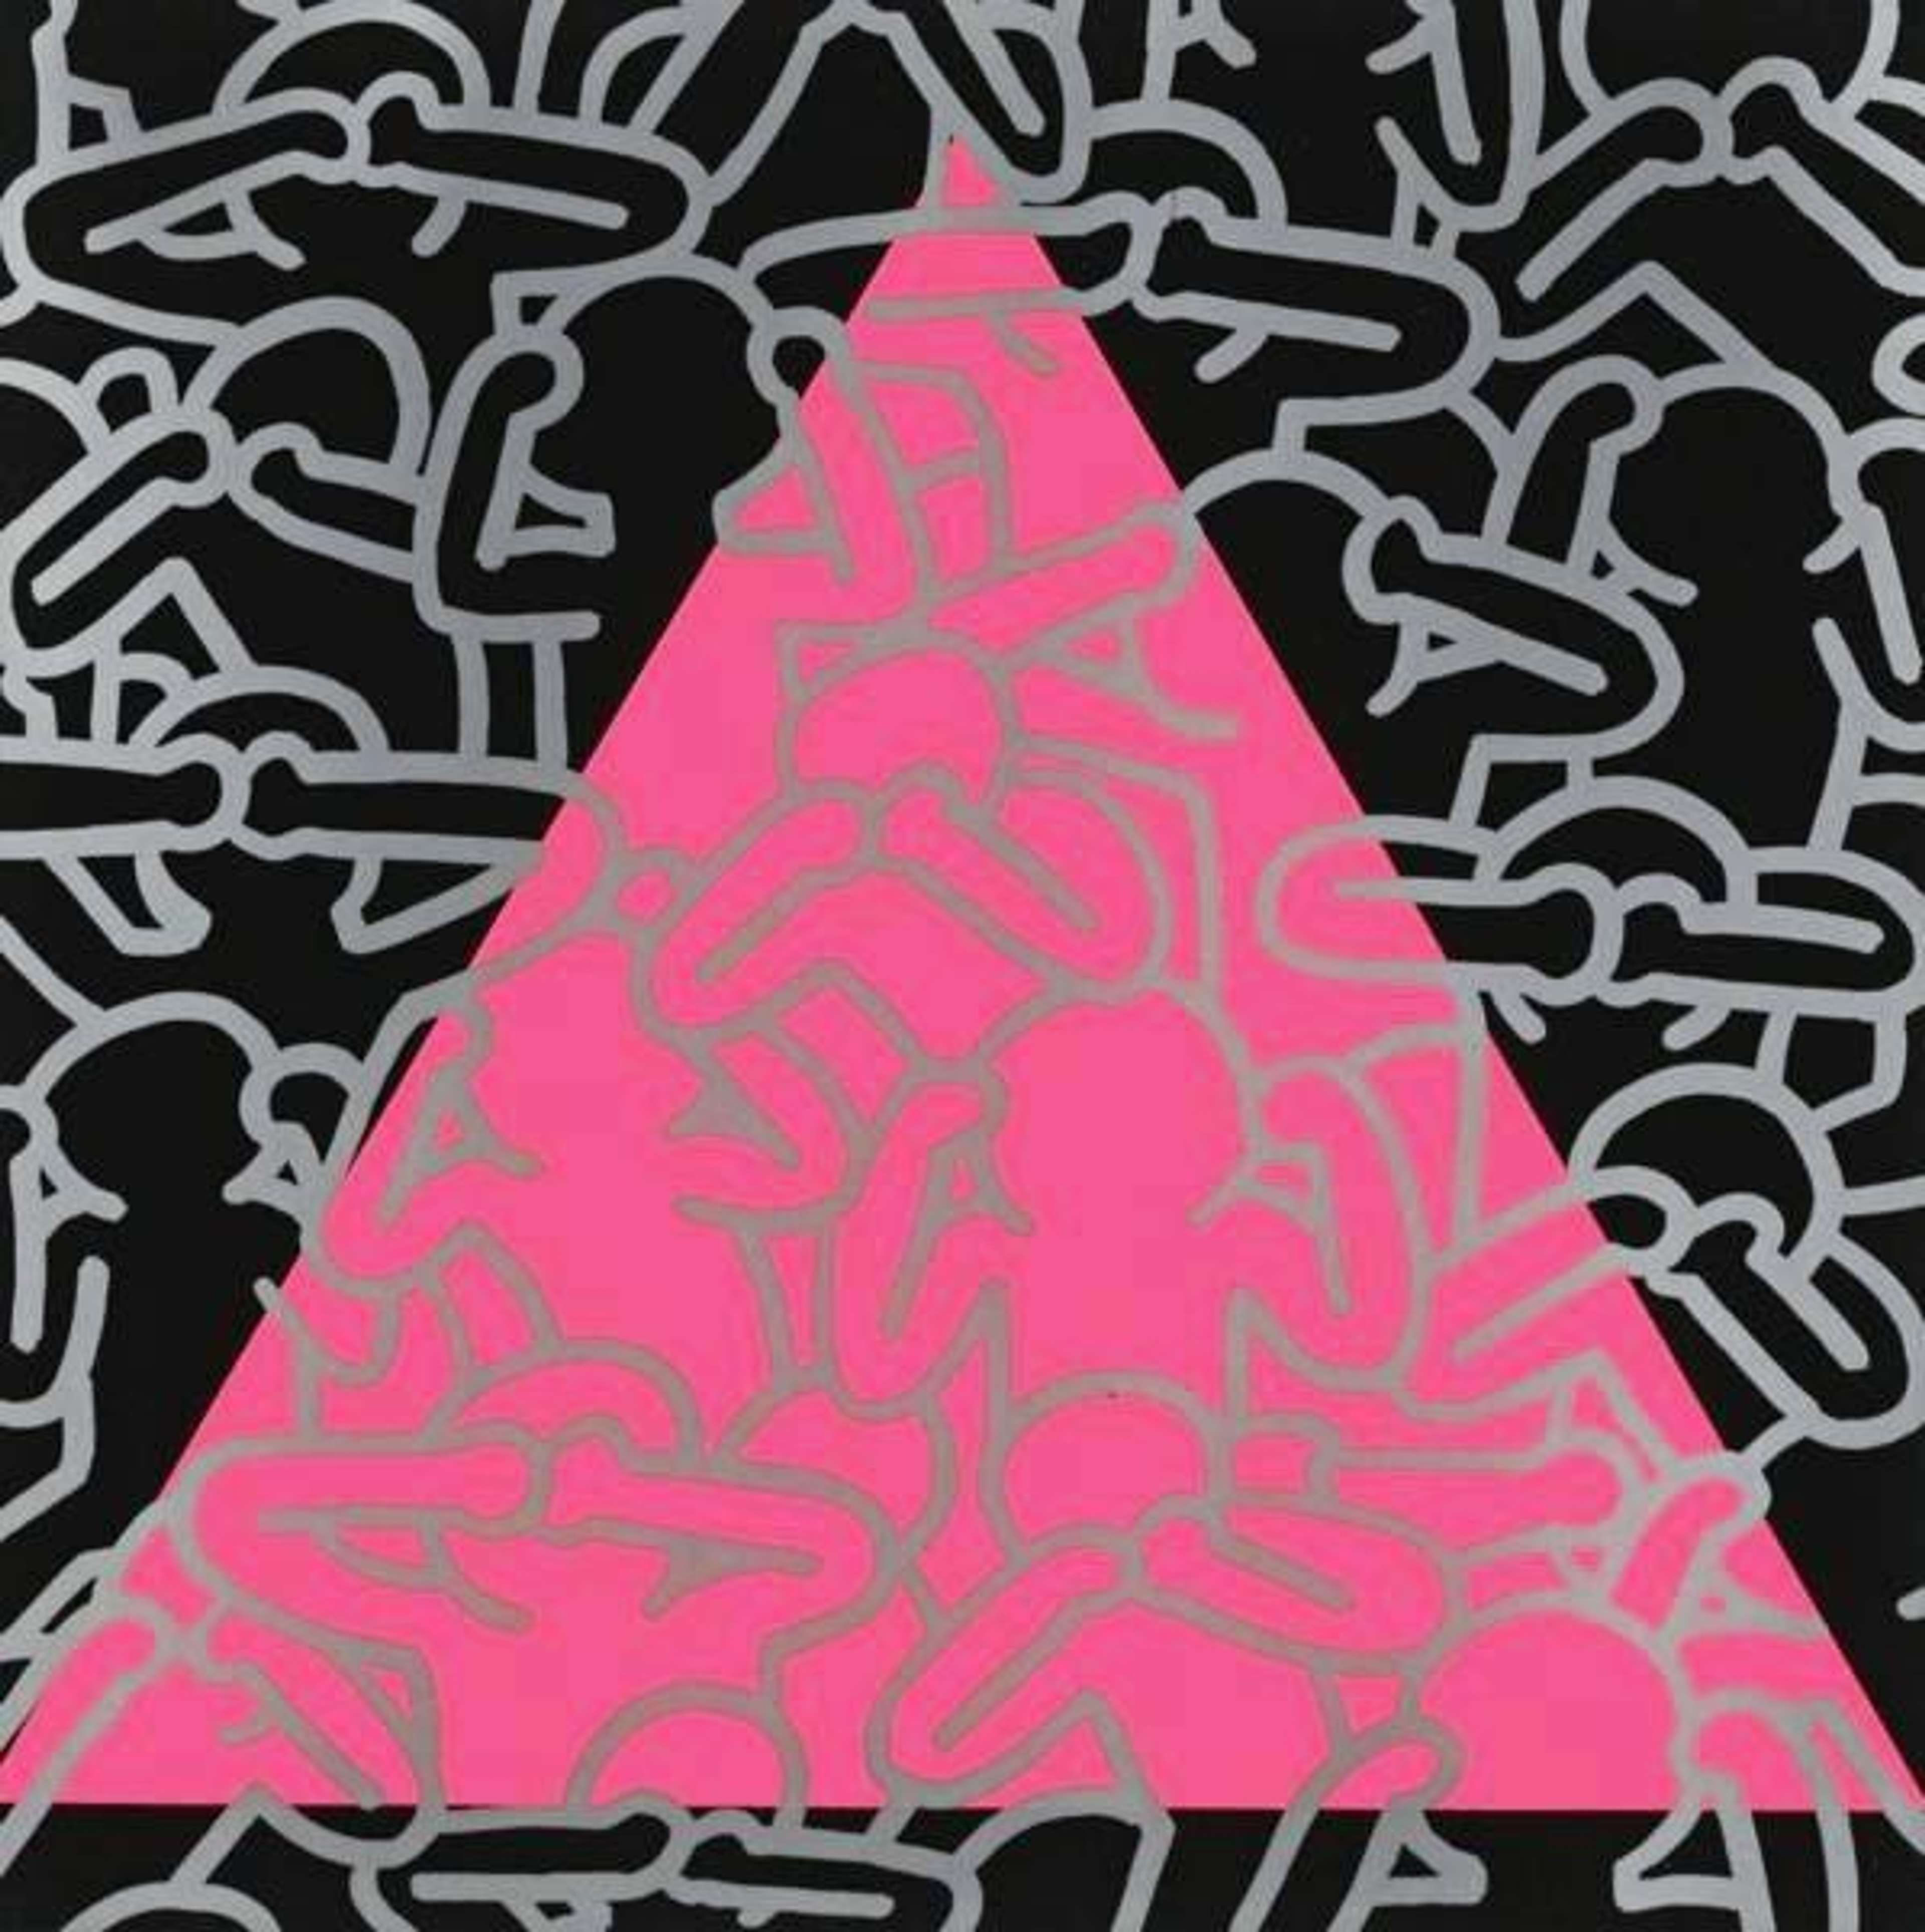 Keith Haring’s Silence Equals Death. A Pop Art screenprint of a pink triangle against a black square with figures covering their eyes, mouths, and noses. 